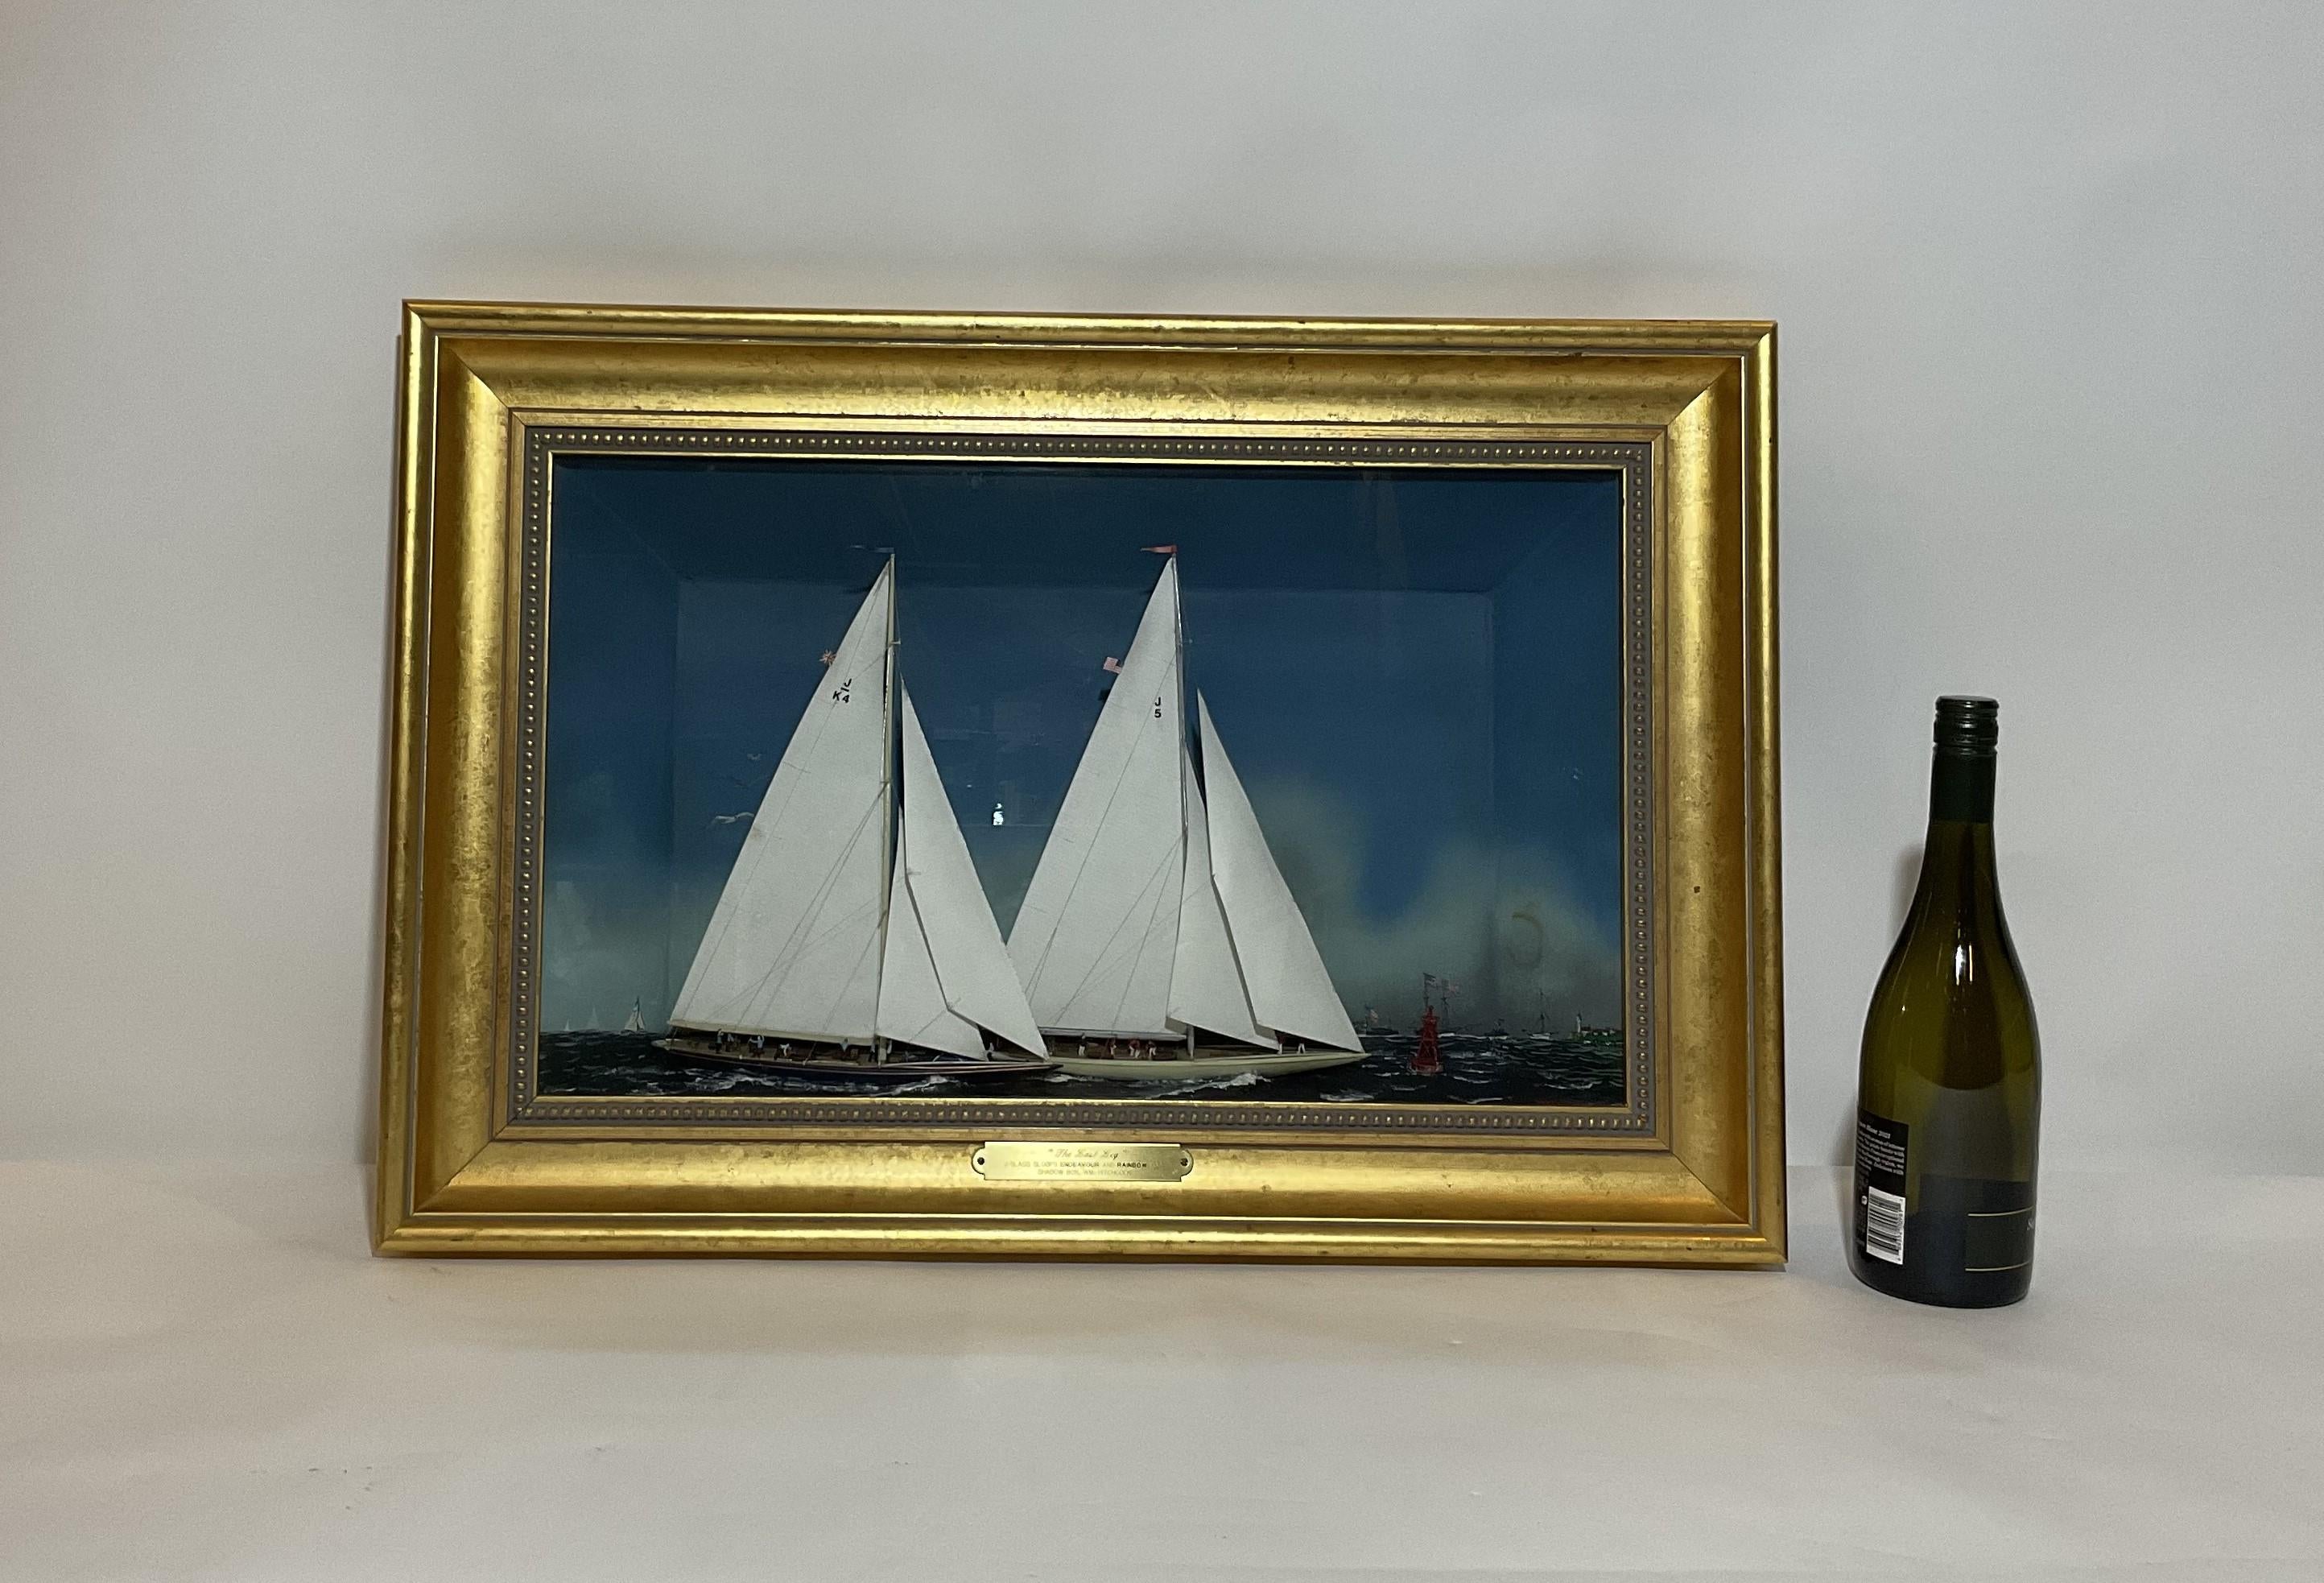 William Hitchcock diorama showing the 1934 America's Cup Final with Endeavor and Rainbow racing past a buoy under full sail with crews on board. Highly detailed by a diorama expert. Painted background with ships. Mounted into a shadow box bracketed